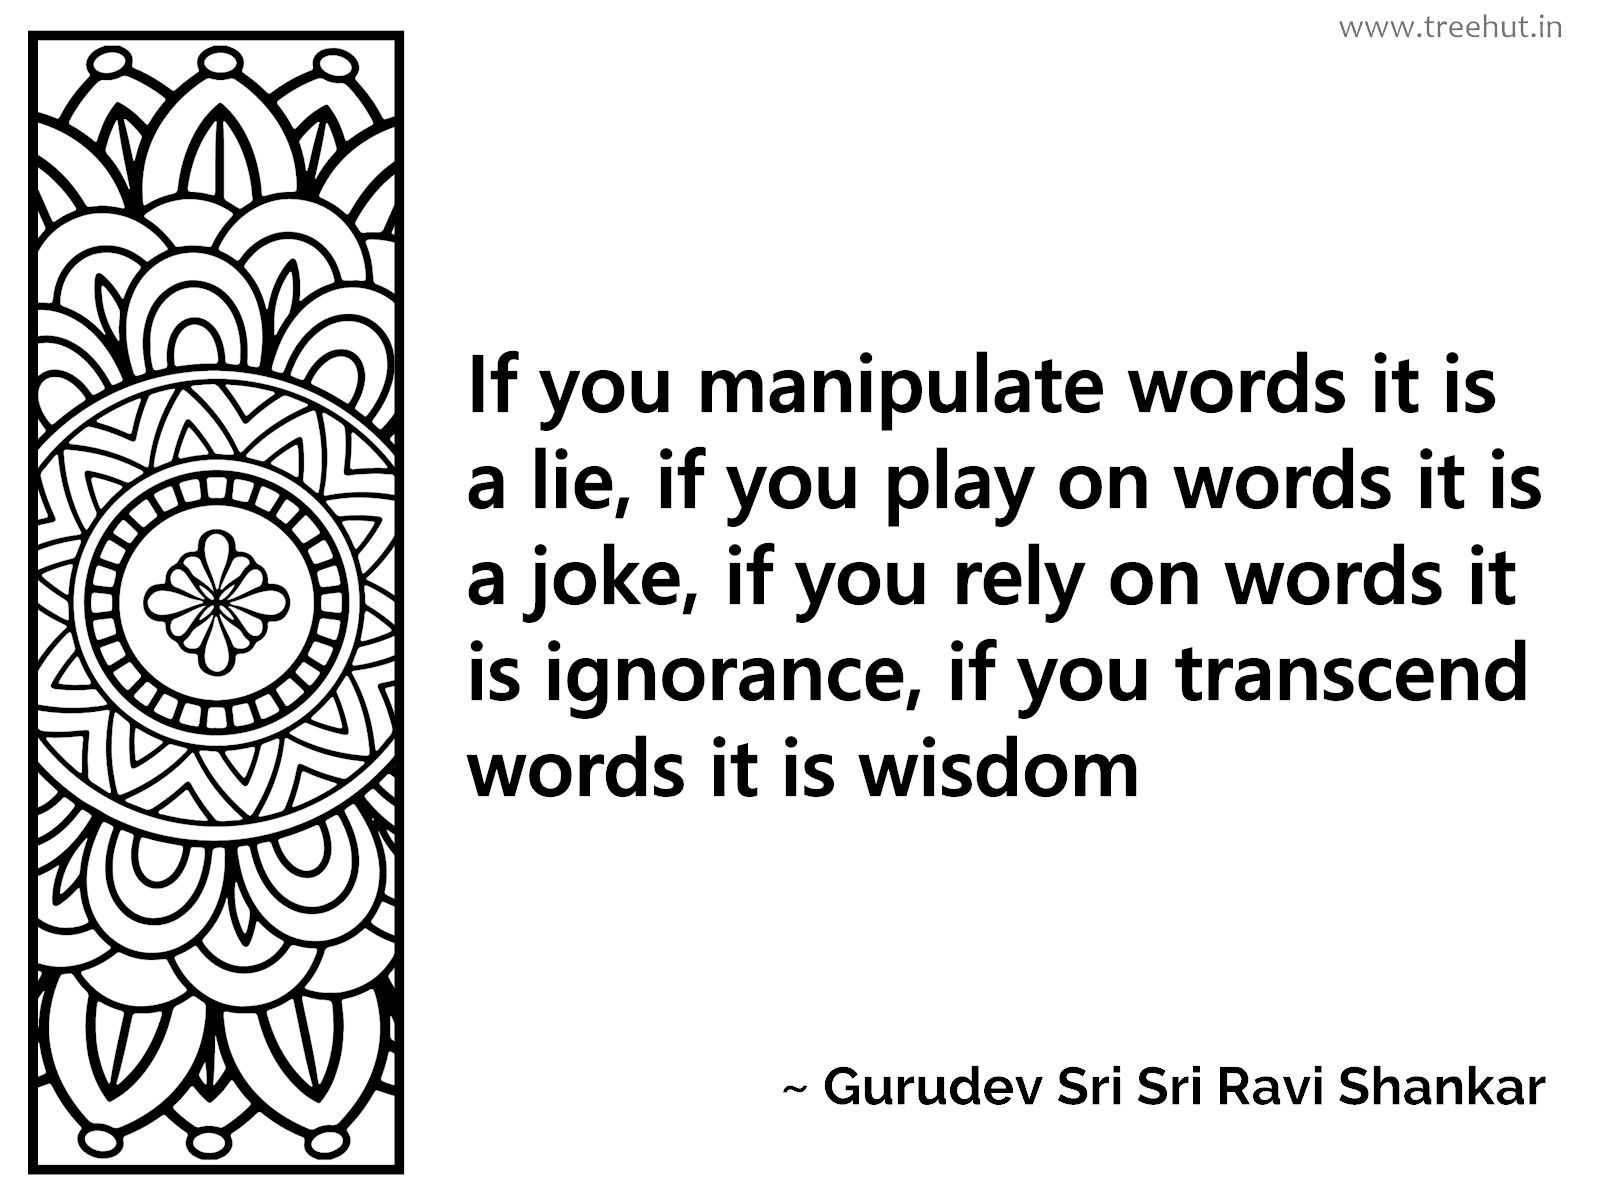 If you manipulate words it is a lie, if you play on words it is a joke, if you rely on words it is ignorance, if you transcend words it is wisdom Inspirational Quote by Gurudev Sri Sri Ravi Shankar, coloring pages